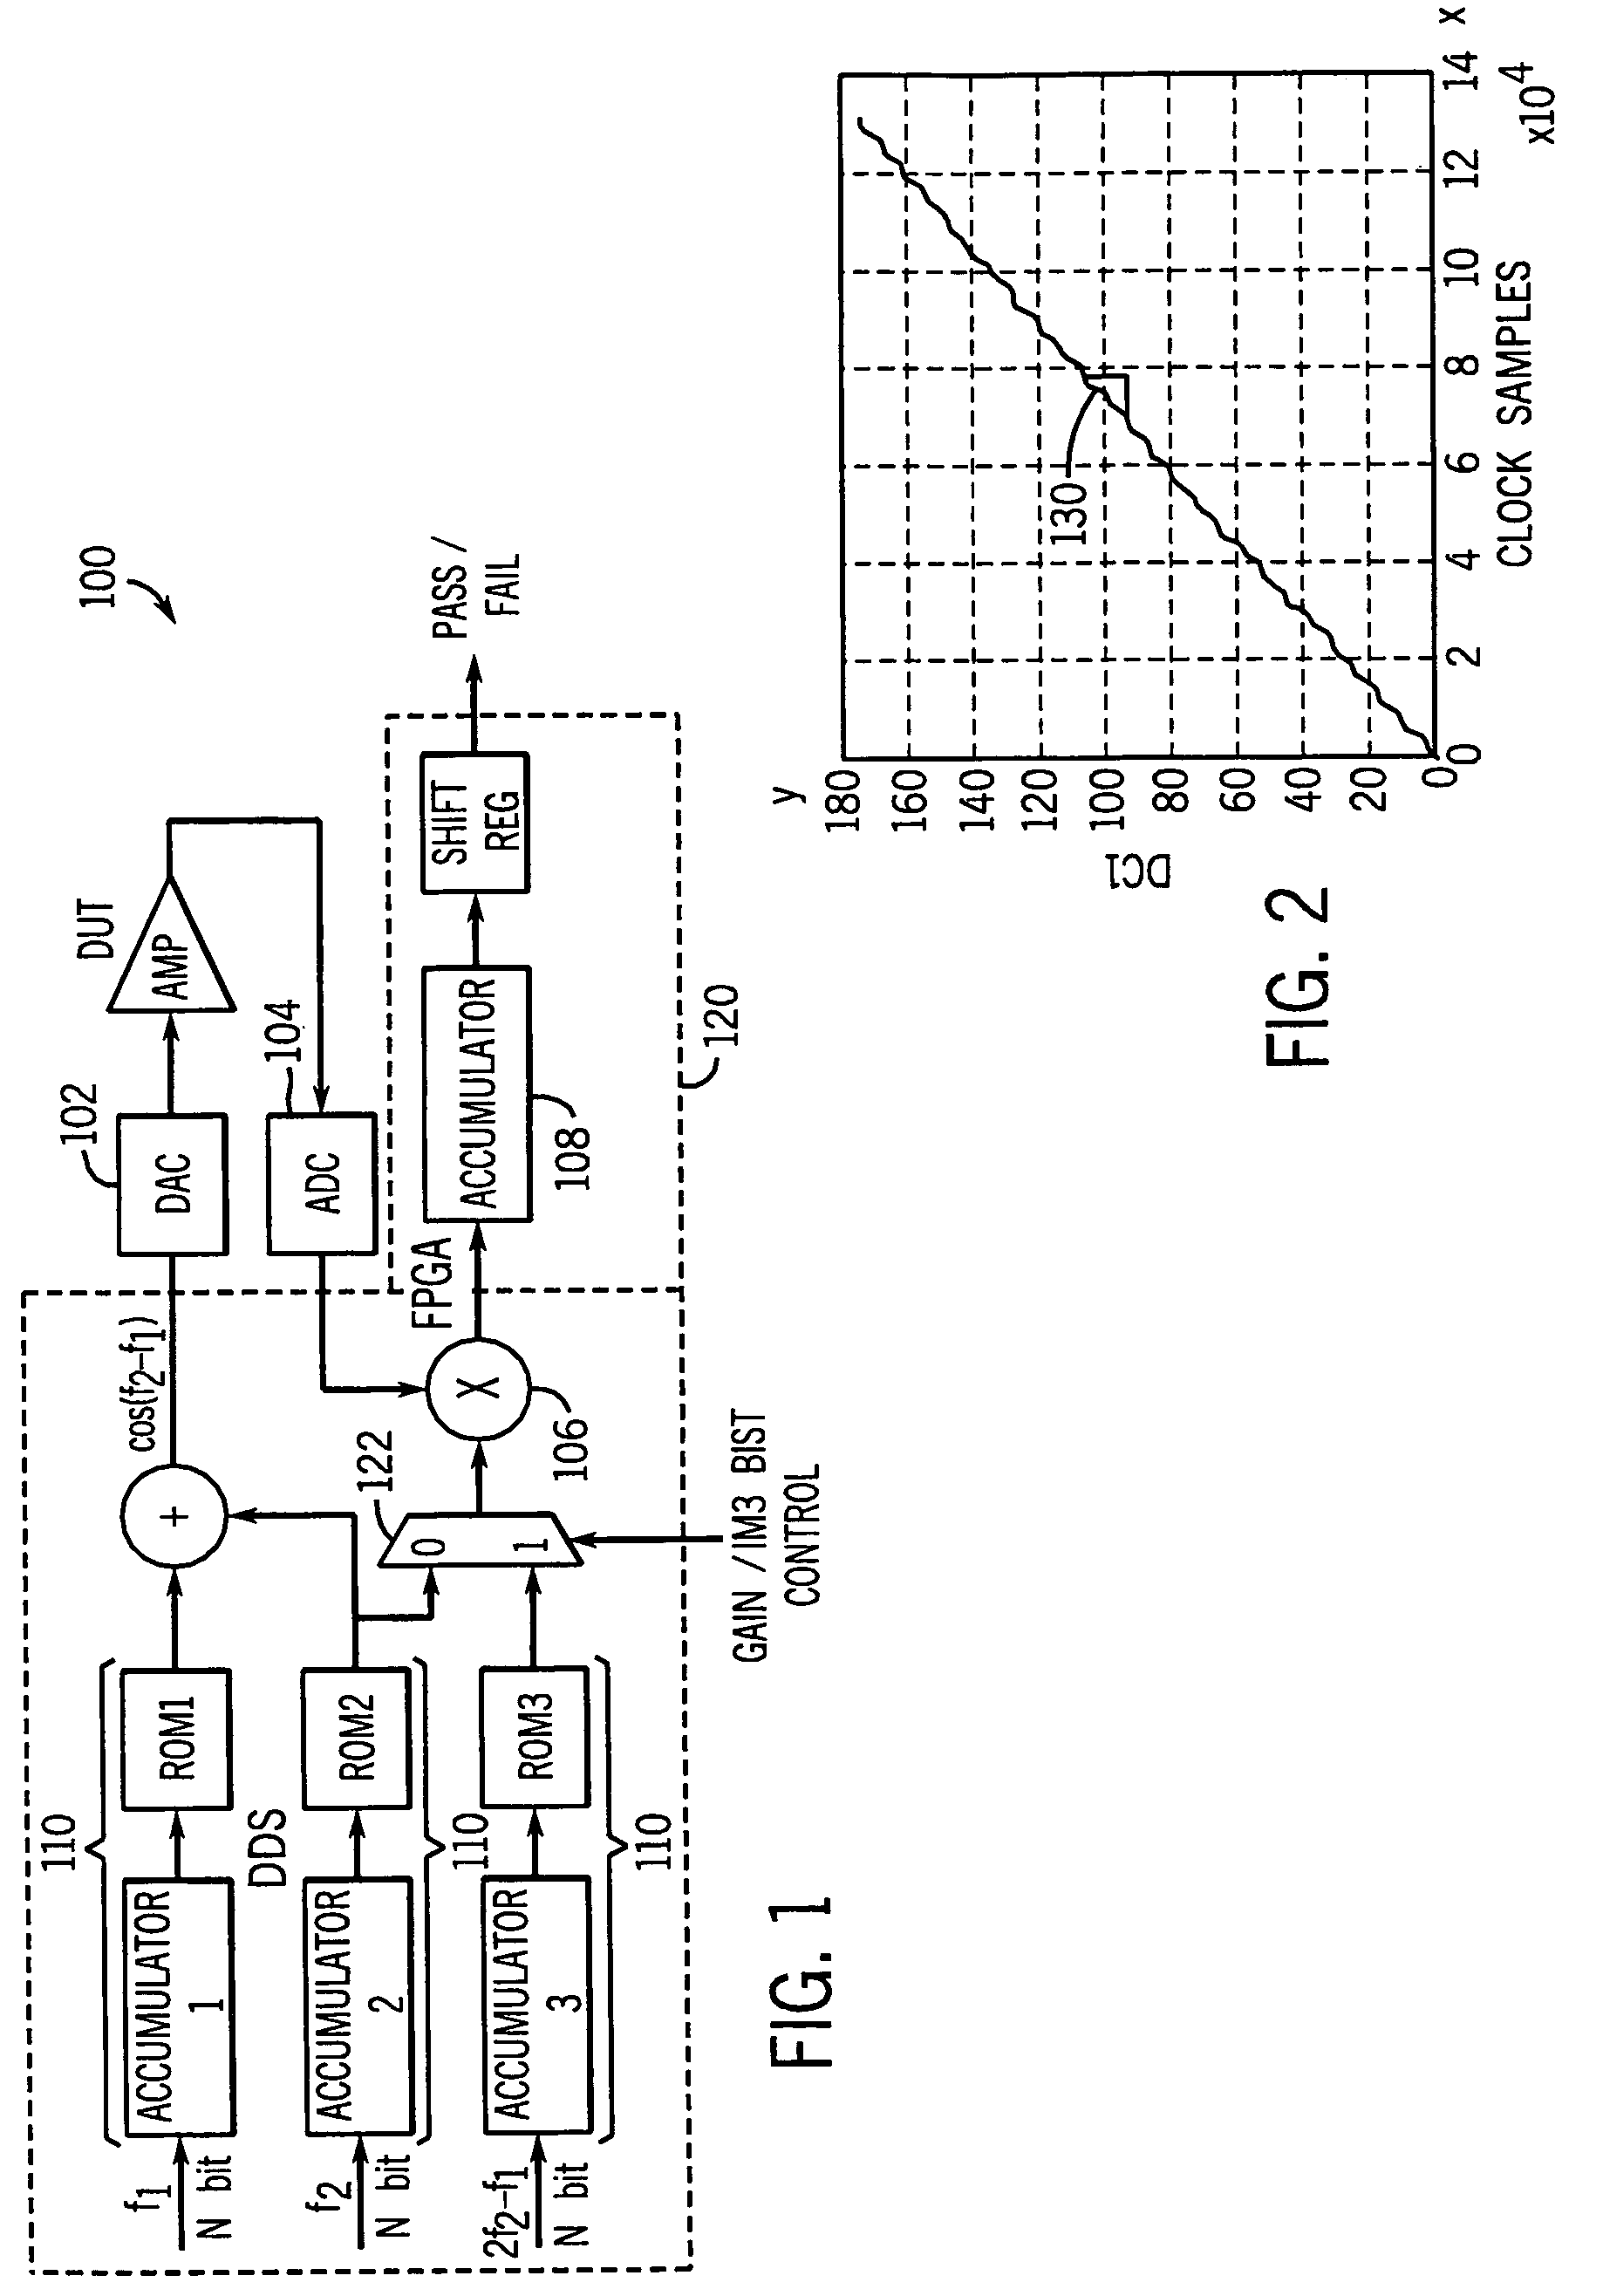 Automatic analog test and compensation with built-in pattern generator and analyzer